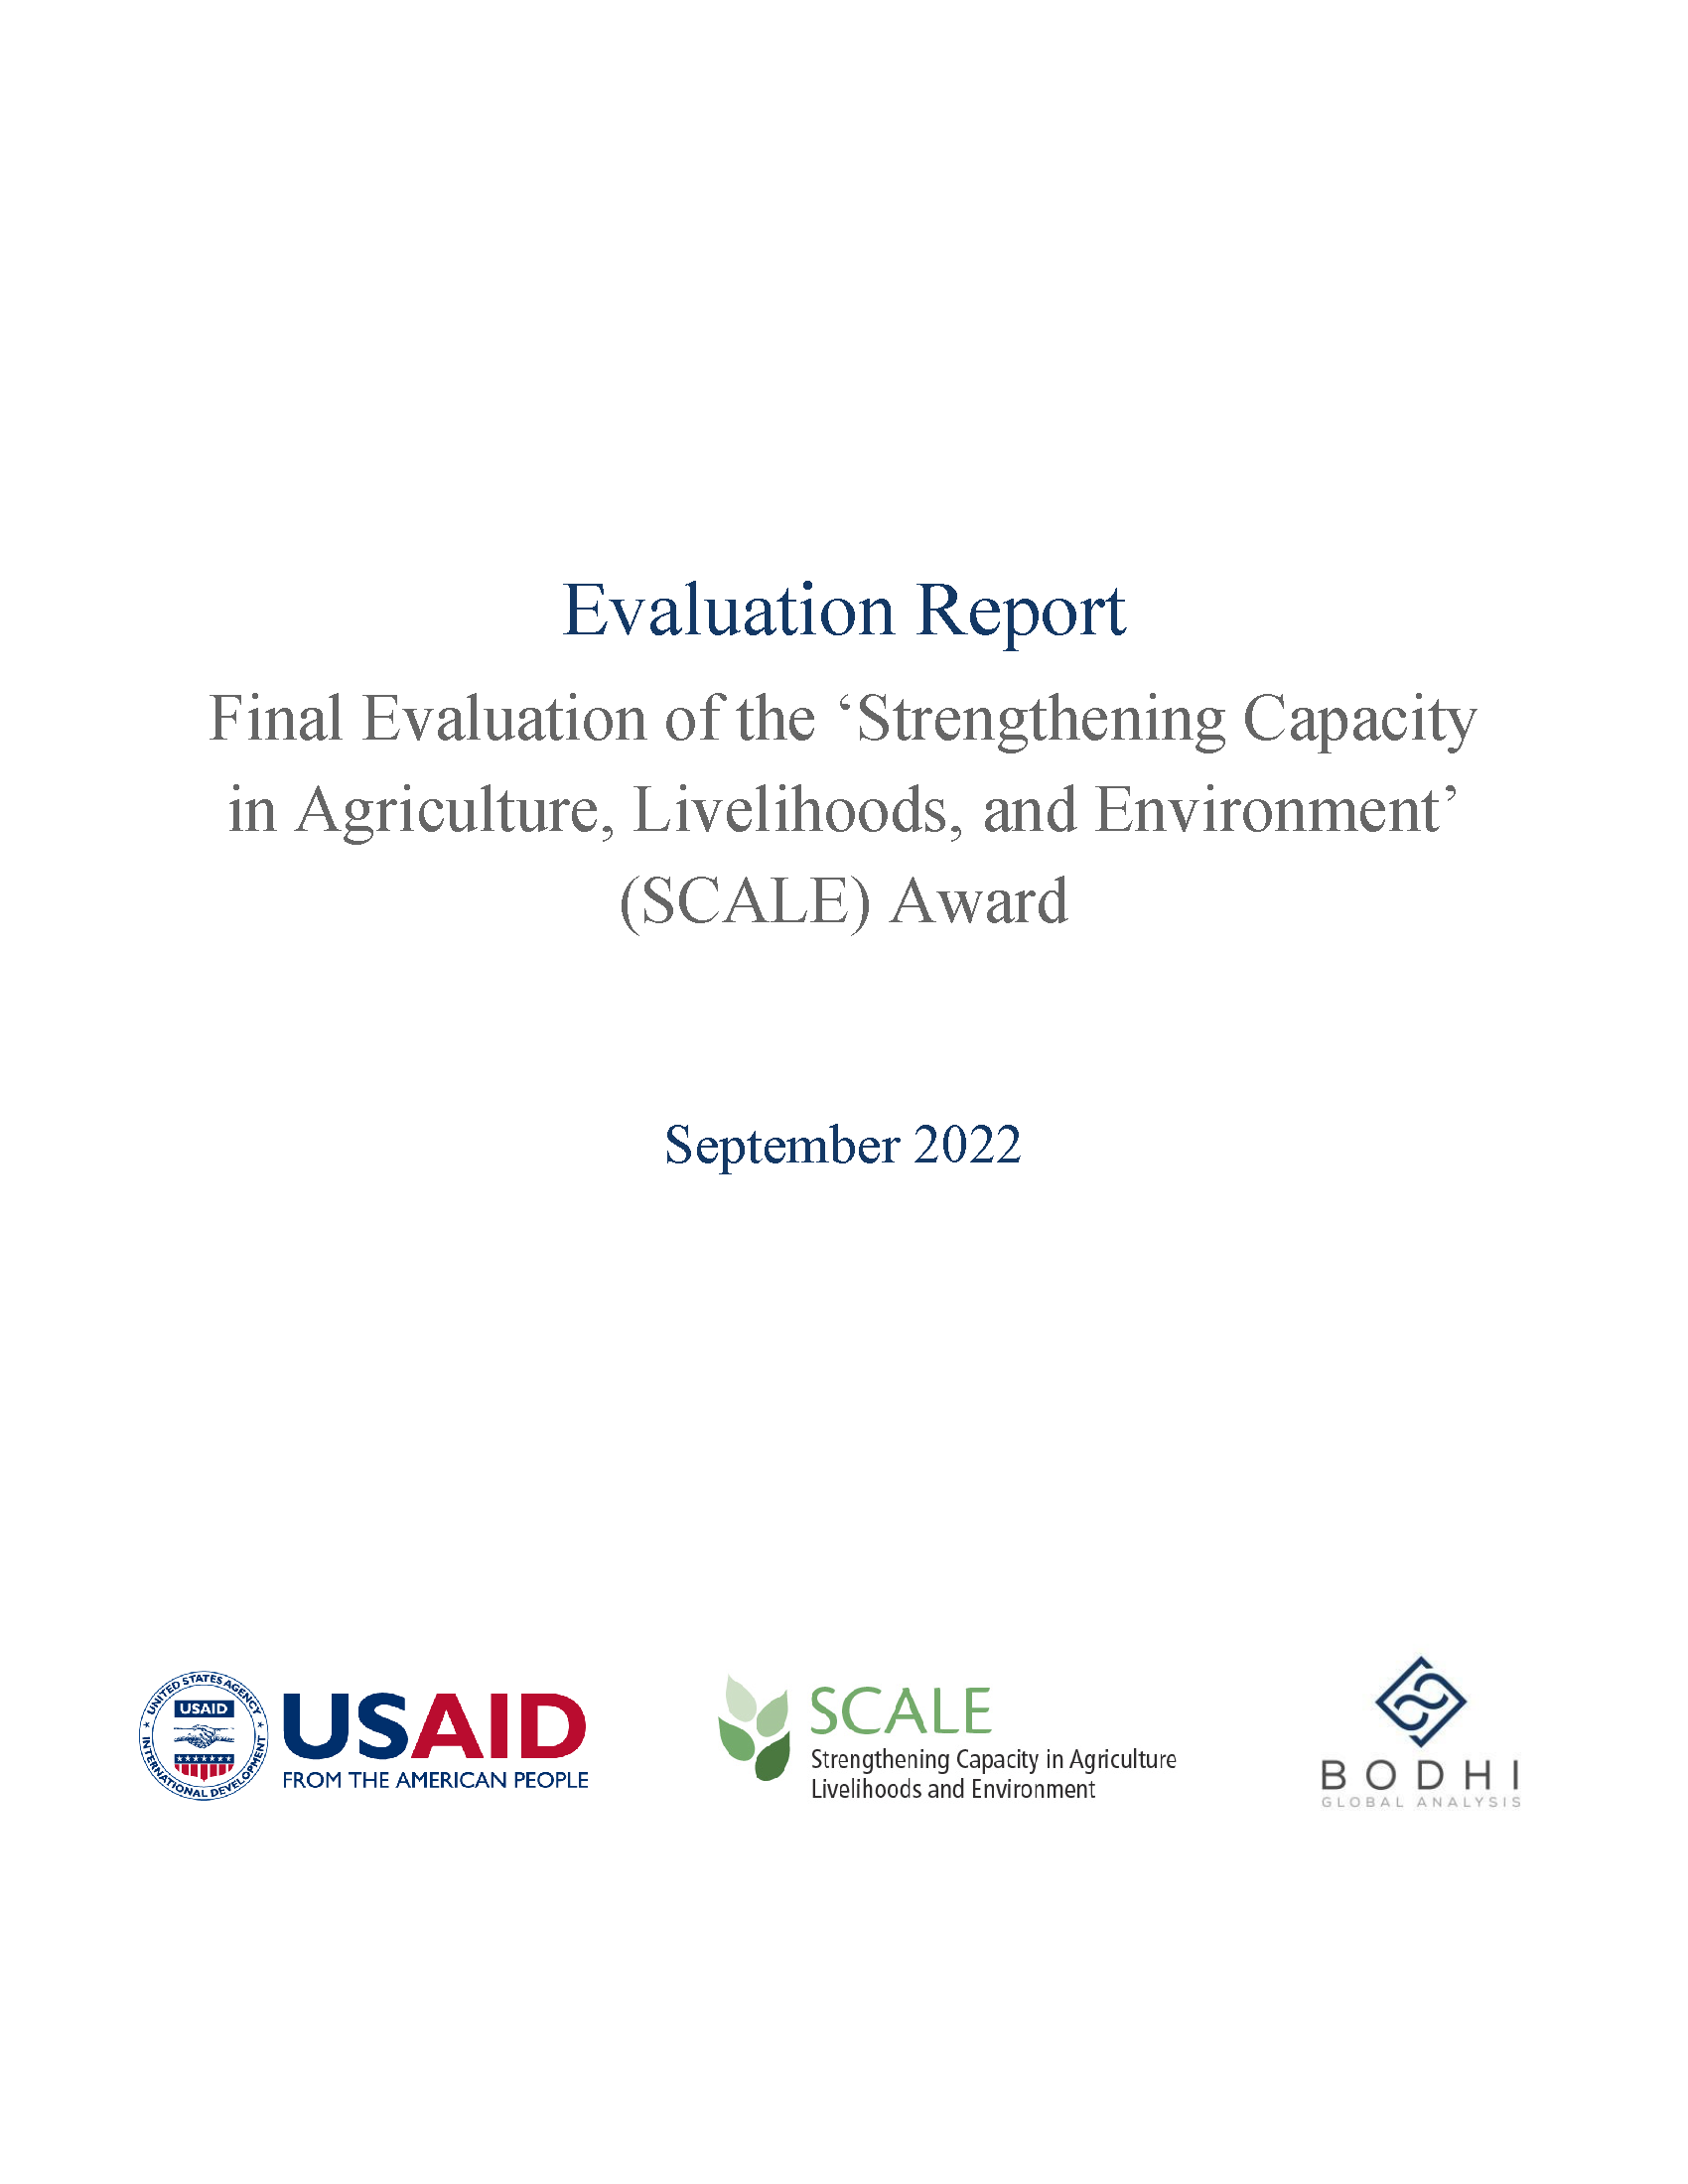 Cover page for SCALE Final Evaluation Report